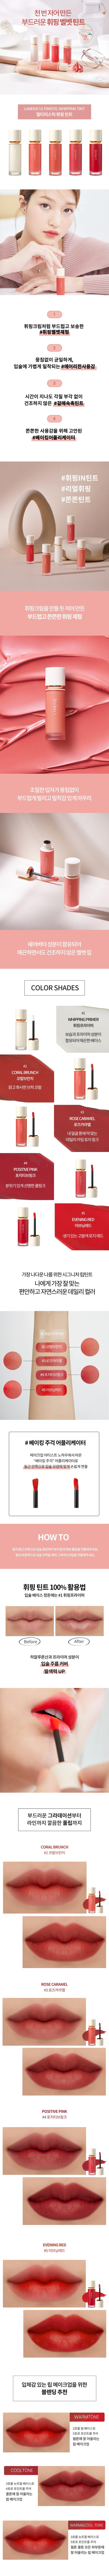 Laneige Ultimistic Whipping Tint korean cosmetic makeup product online shop malaysia Macau taiwan2